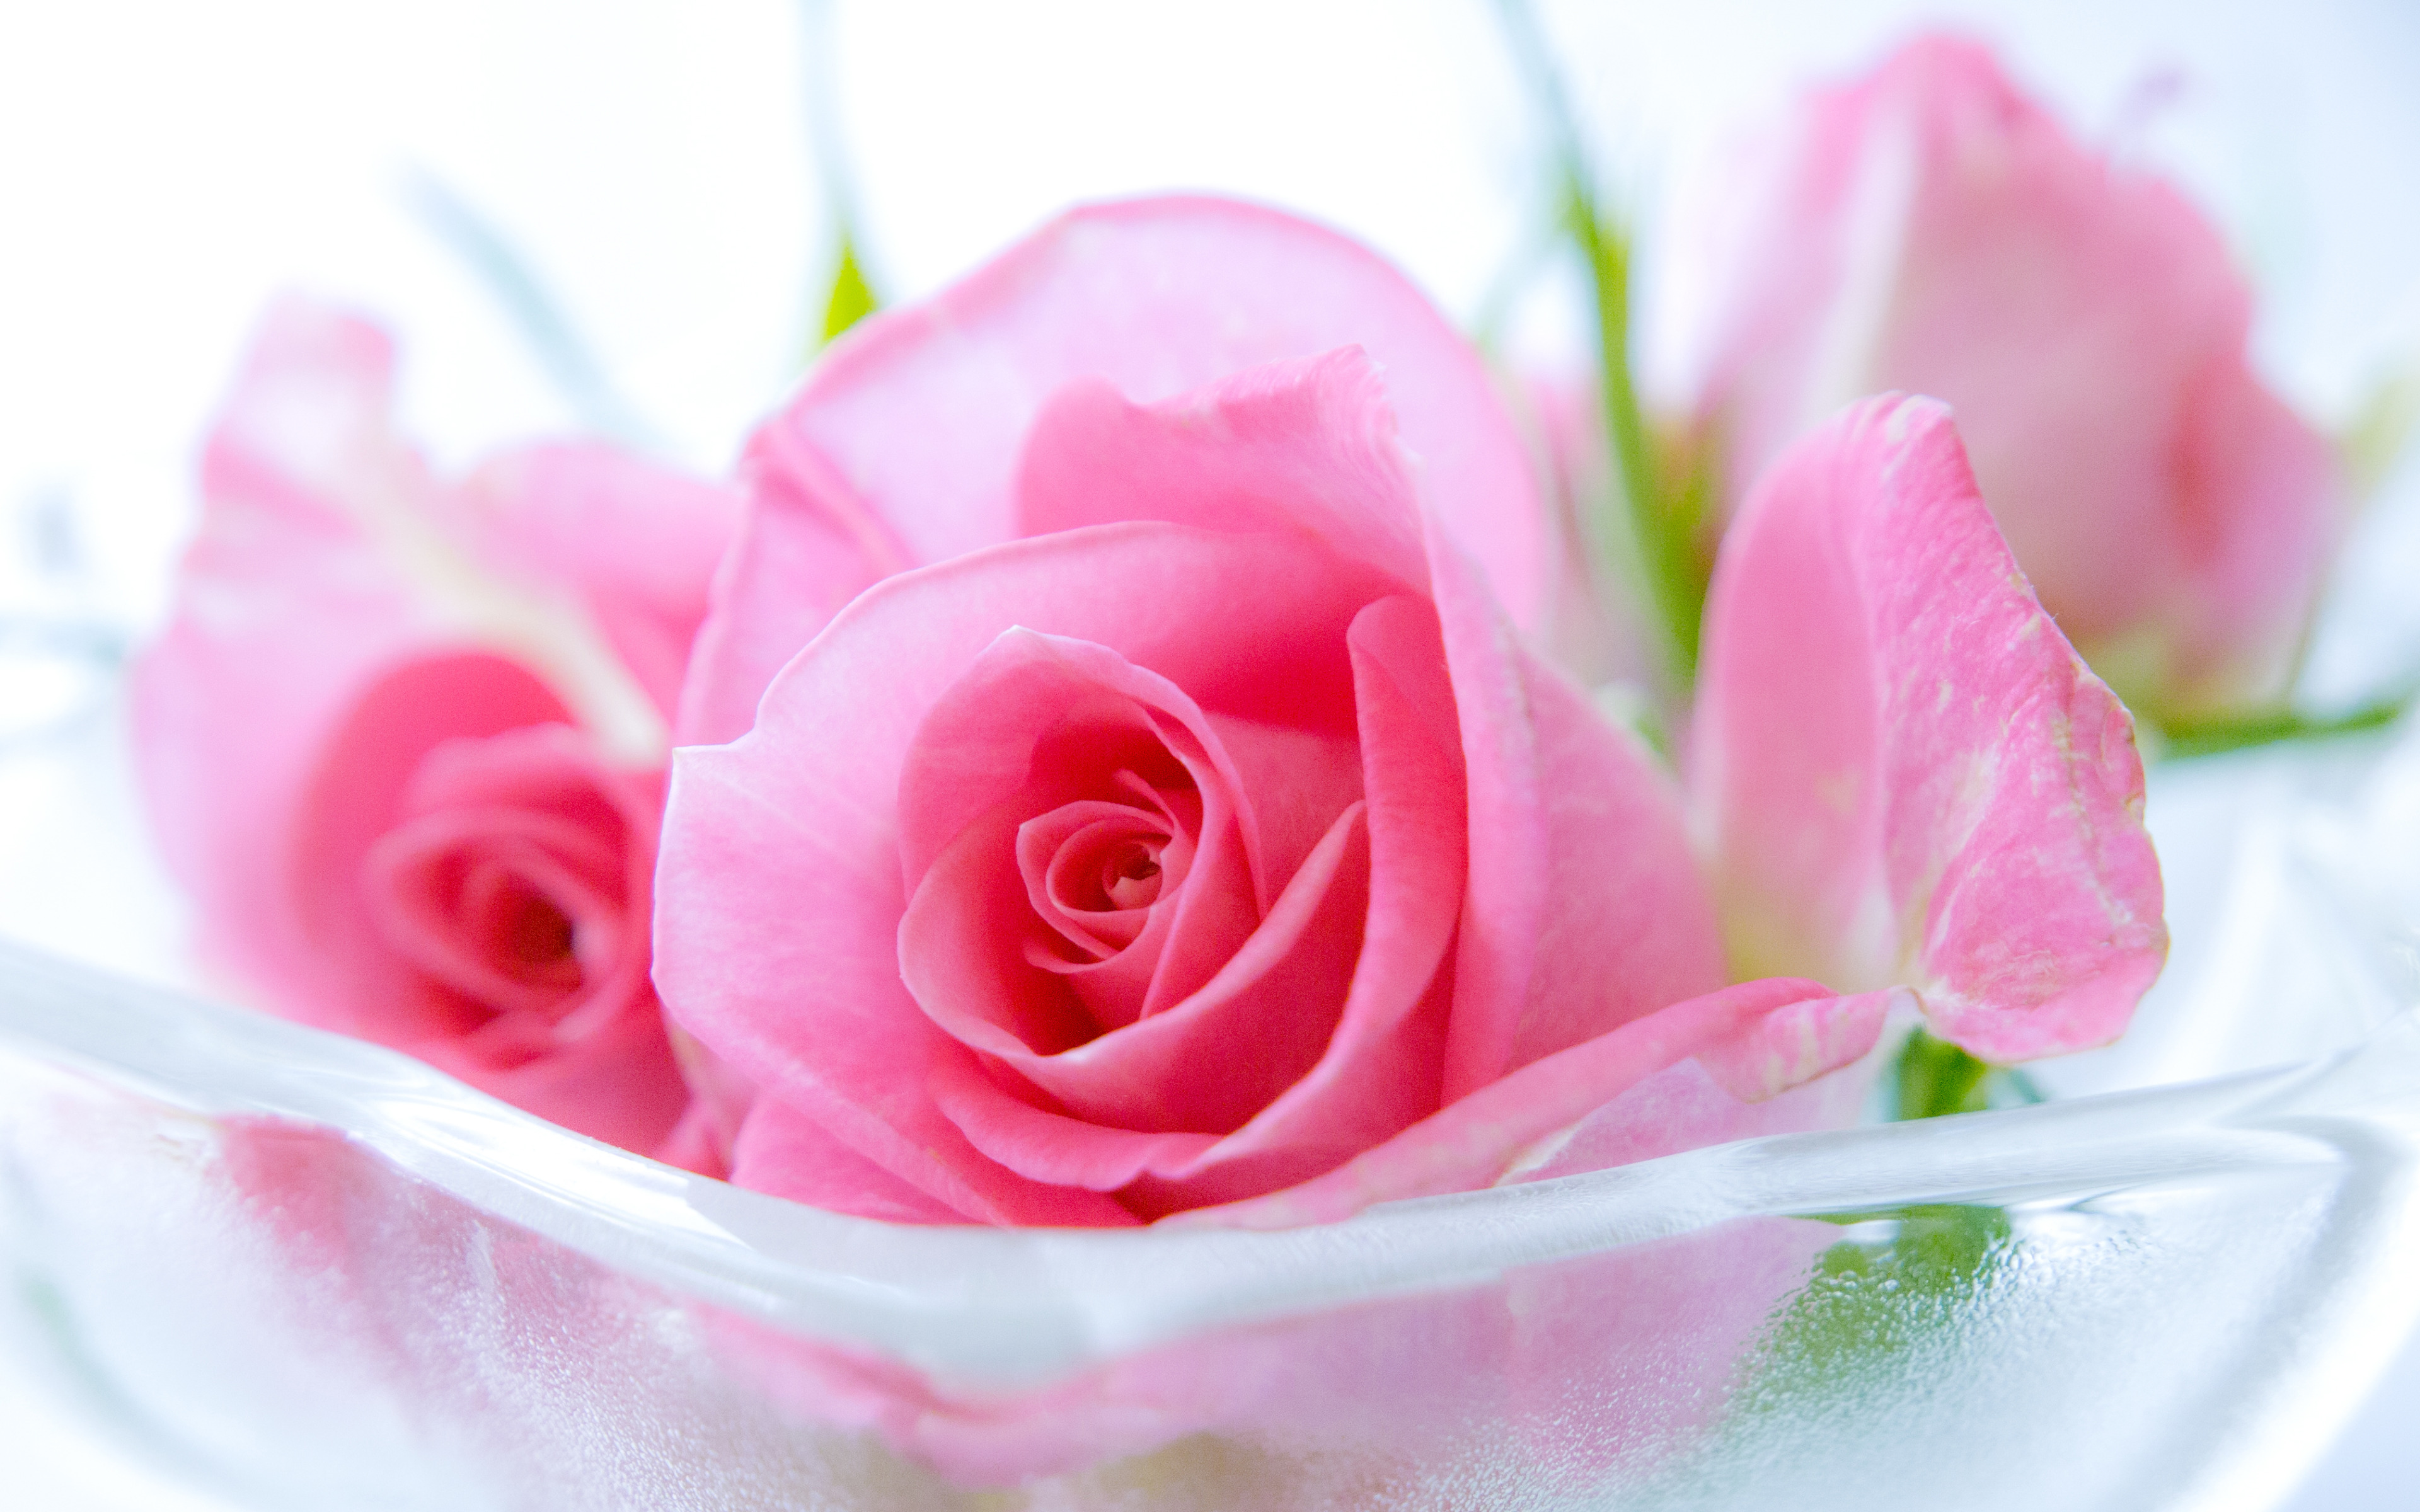 Pink Roses Images, Pink Roses Wallpapers - 3840x2400 Wallpaper 